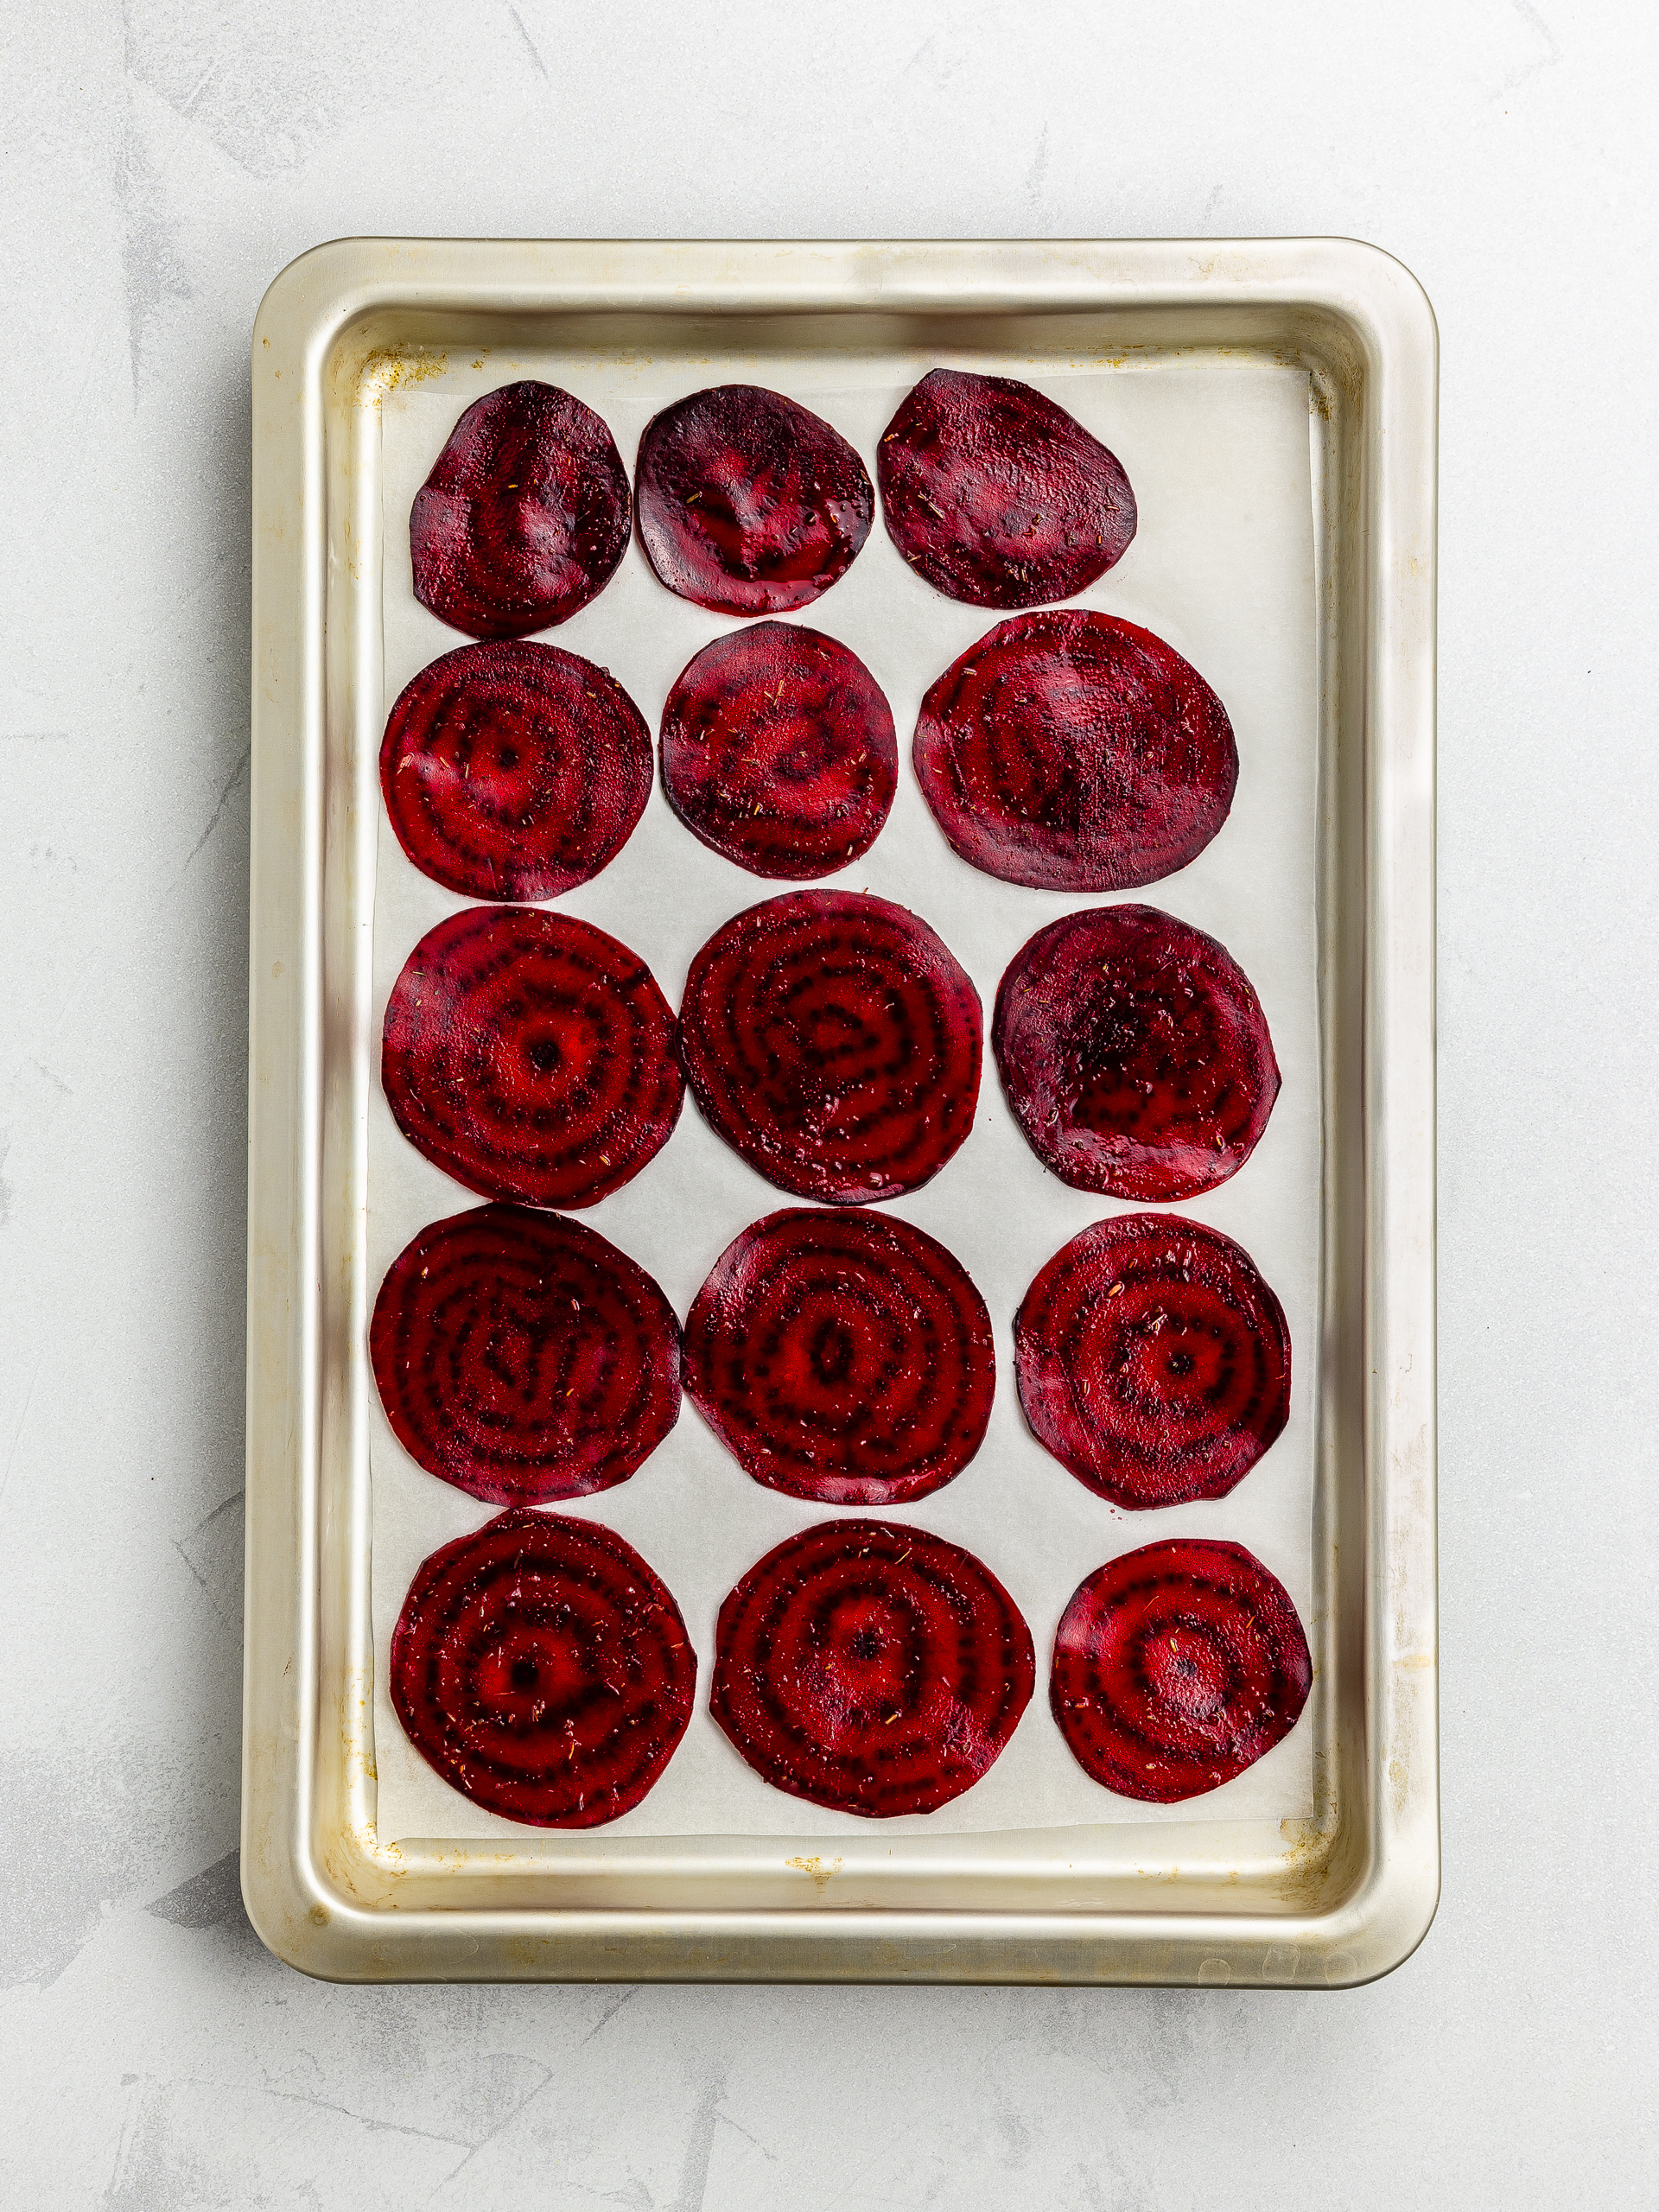 beetroot chips on a baking tray